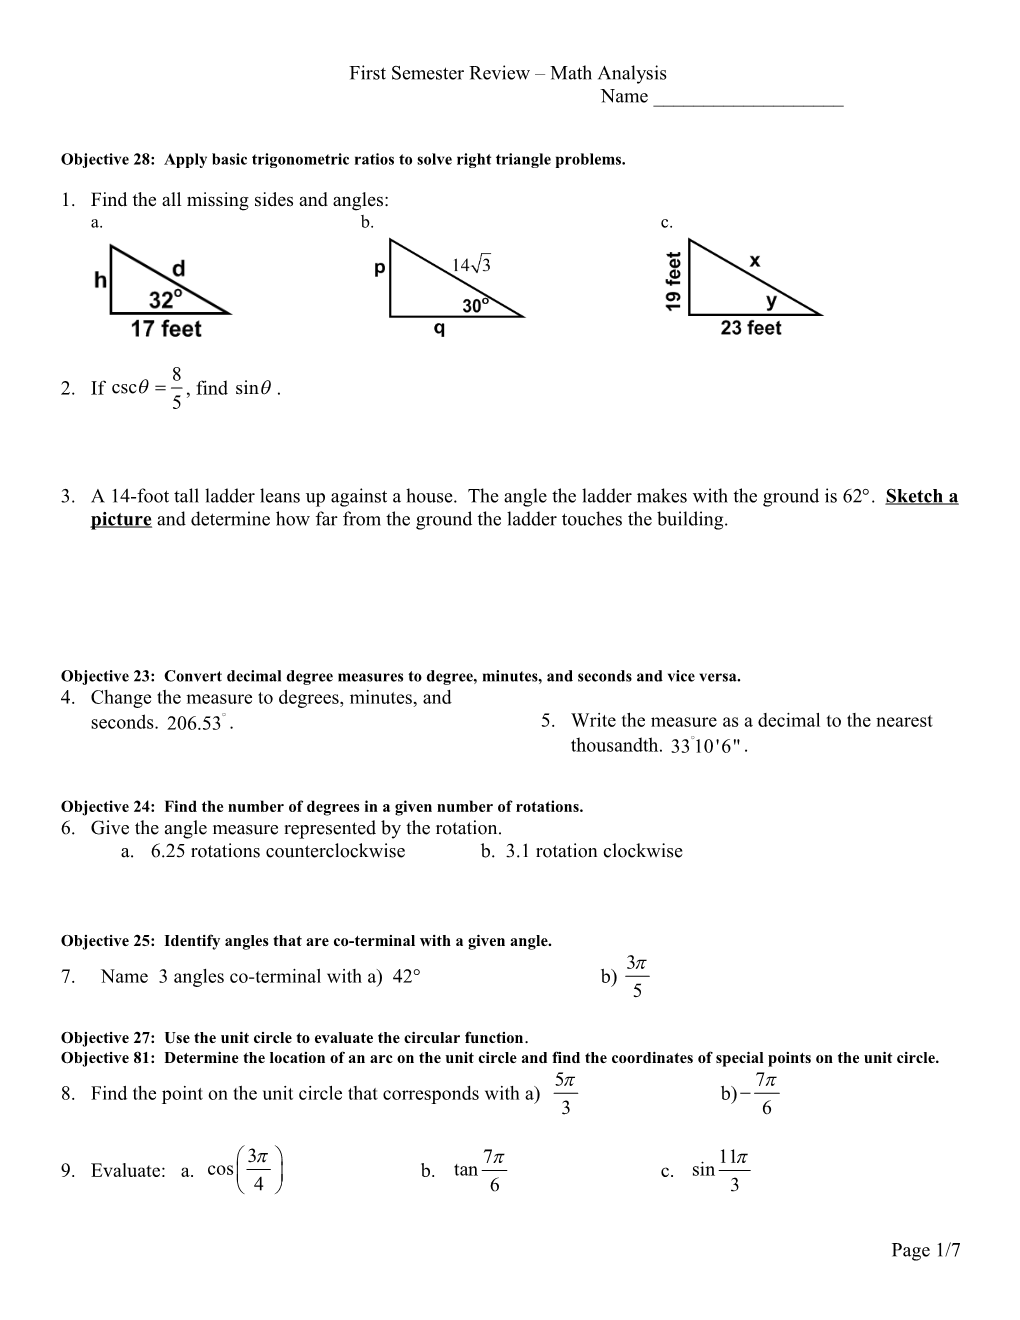 Objective 28: Apply Basic Trigonometric Ratios to Solve Right Triangle Problems